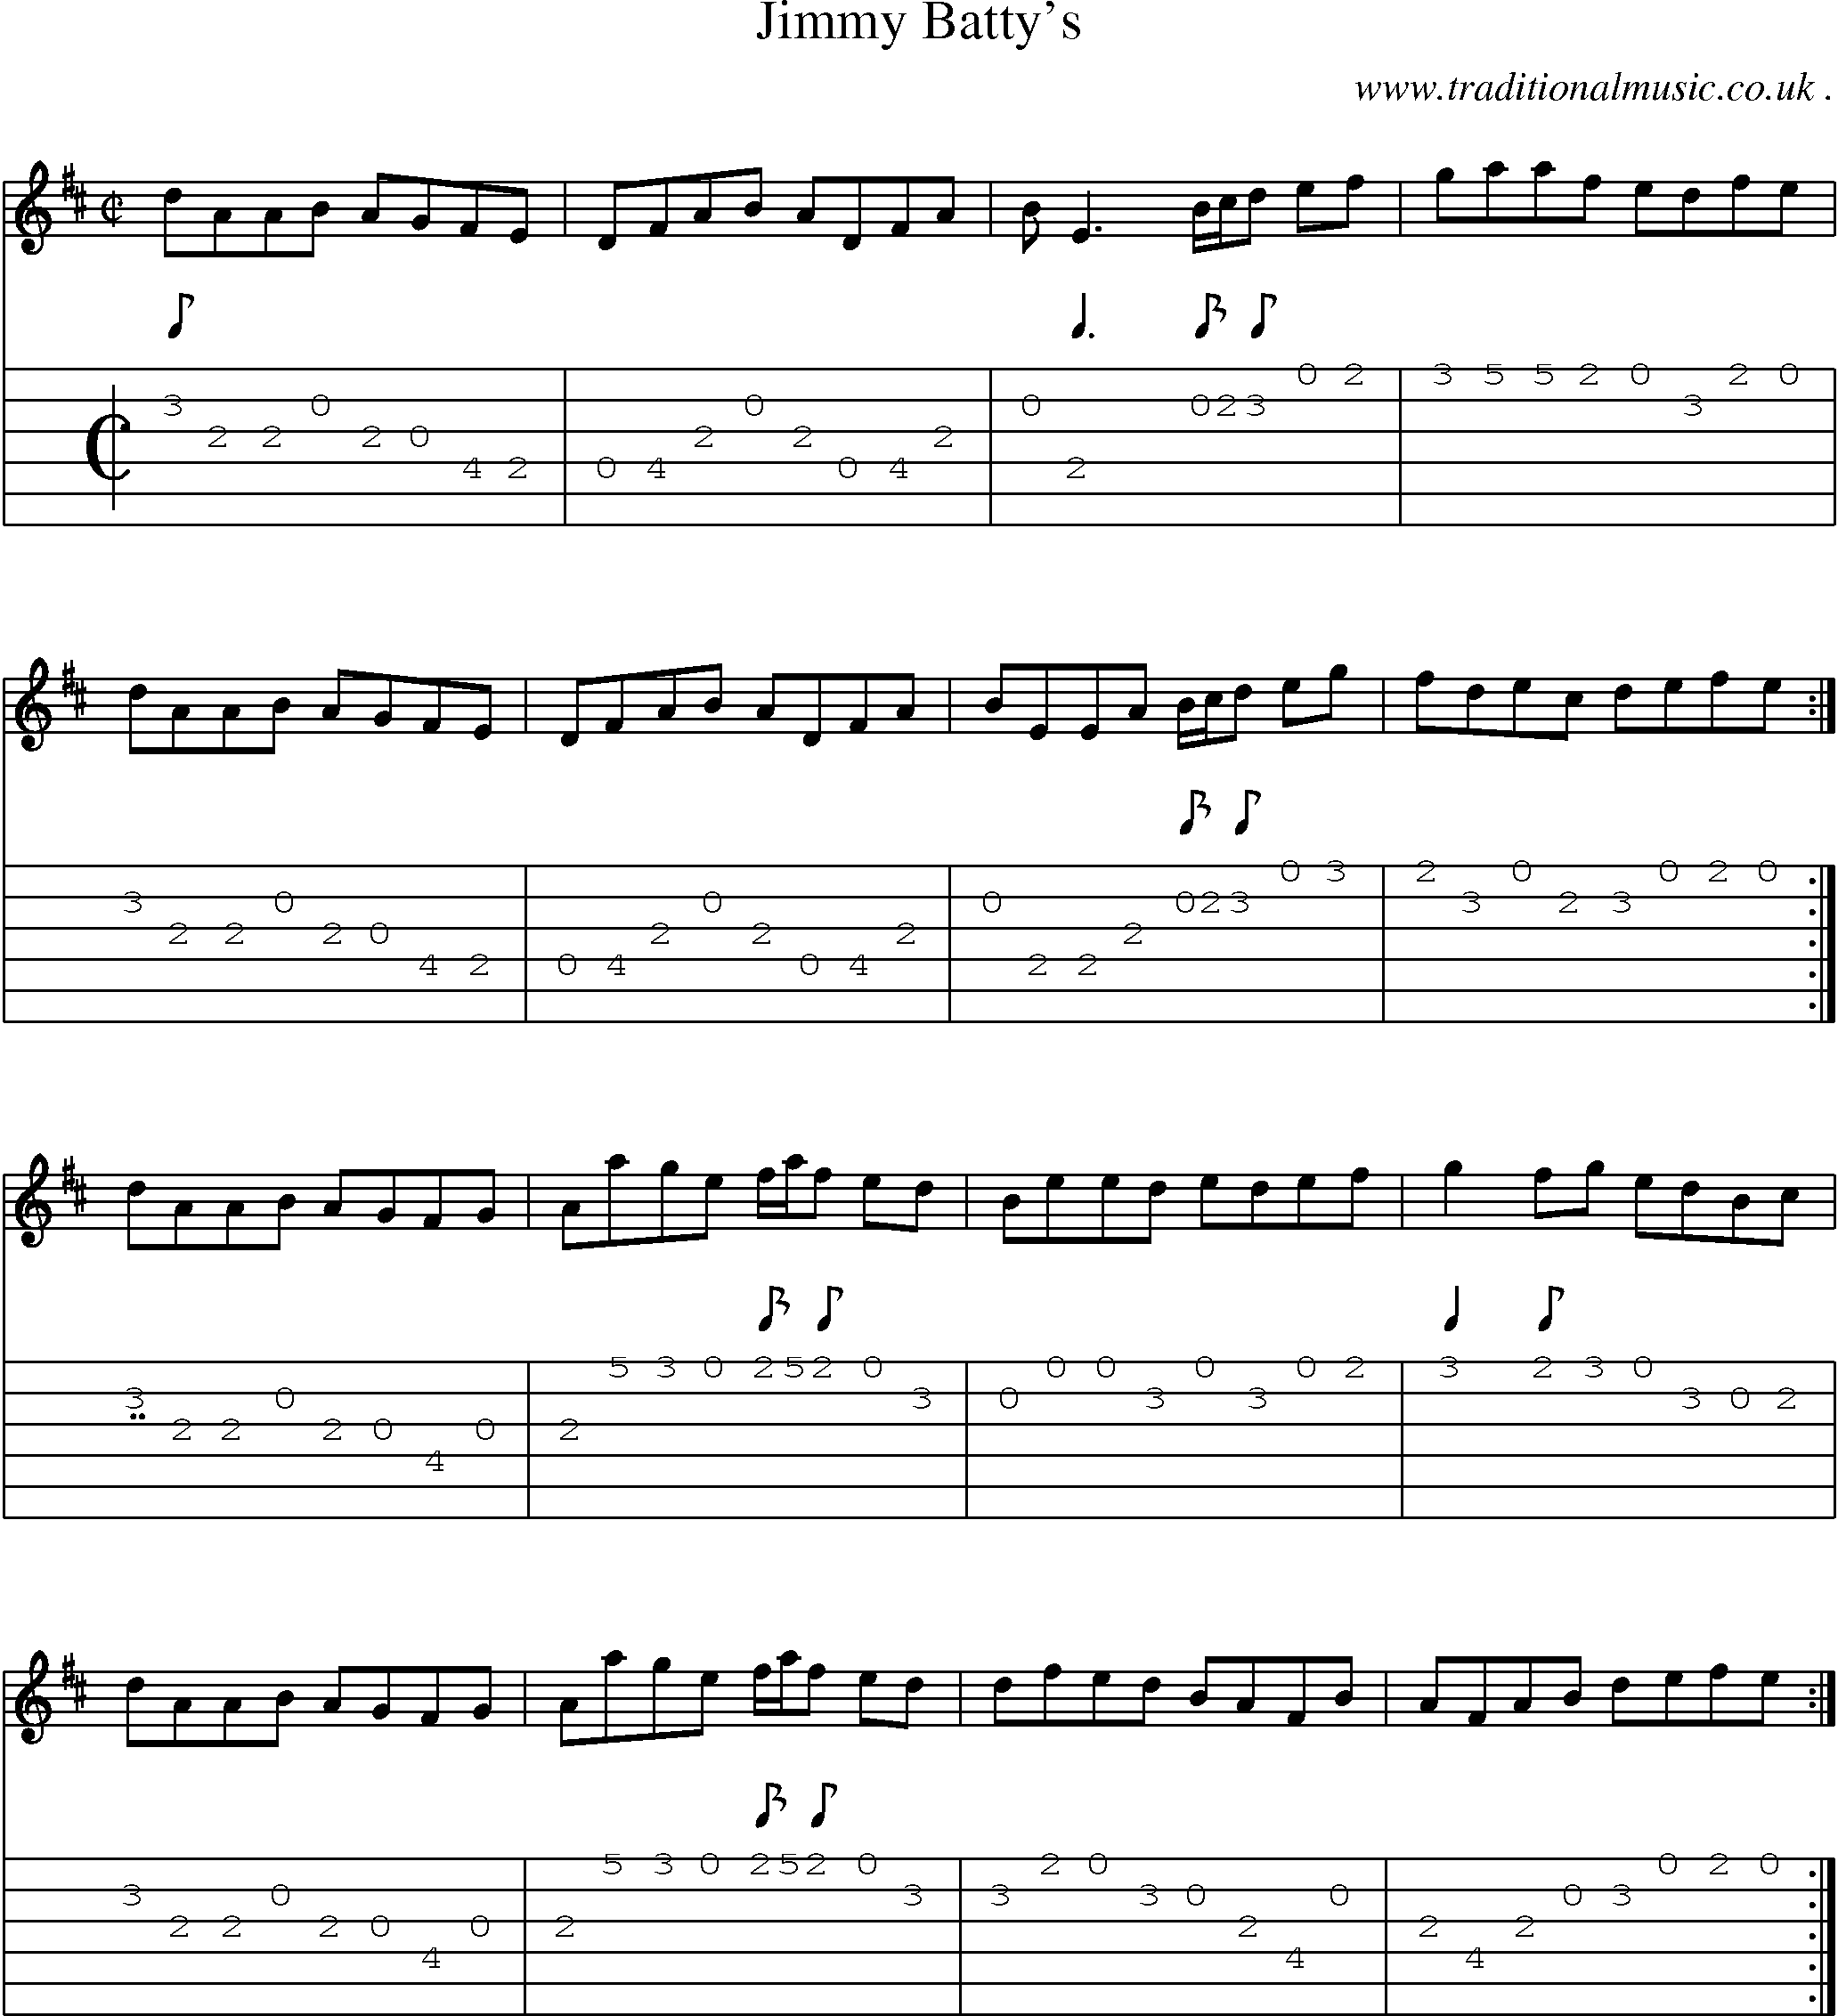 Sheet-Music and Guitar Tabs for Jimmy Battys